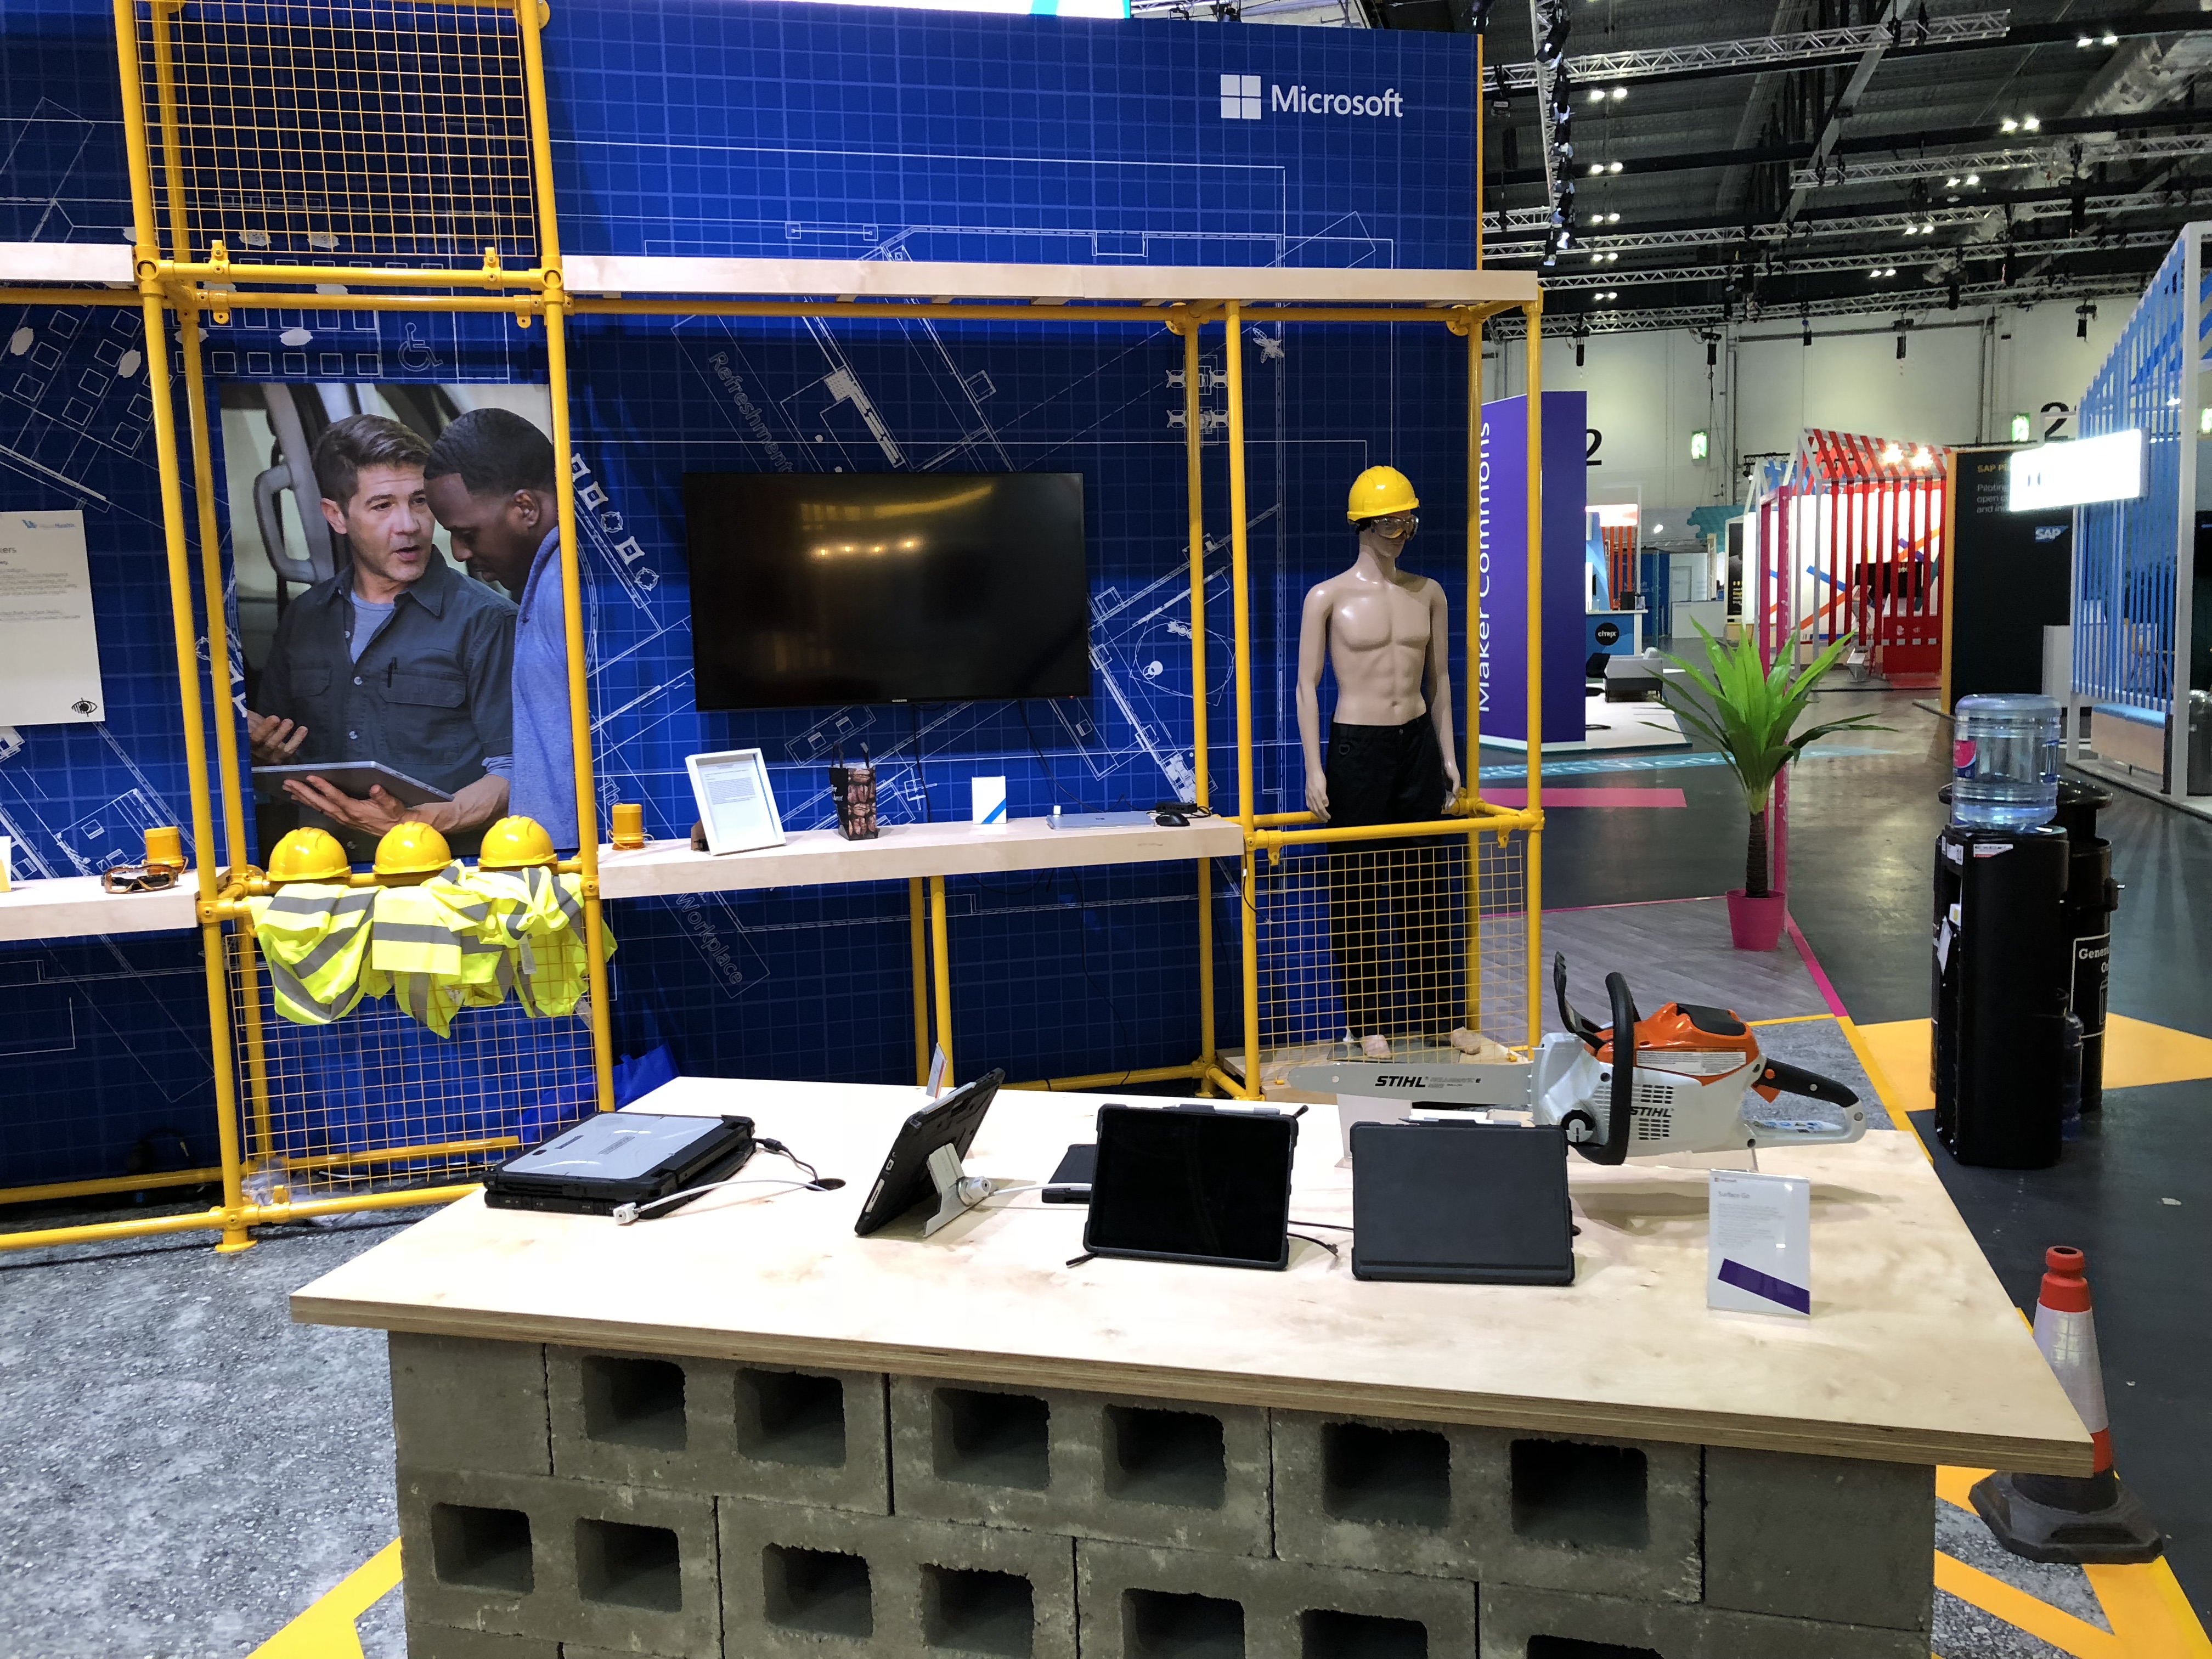 A stand showing how Microsoft helps the manufacturing and construction industries